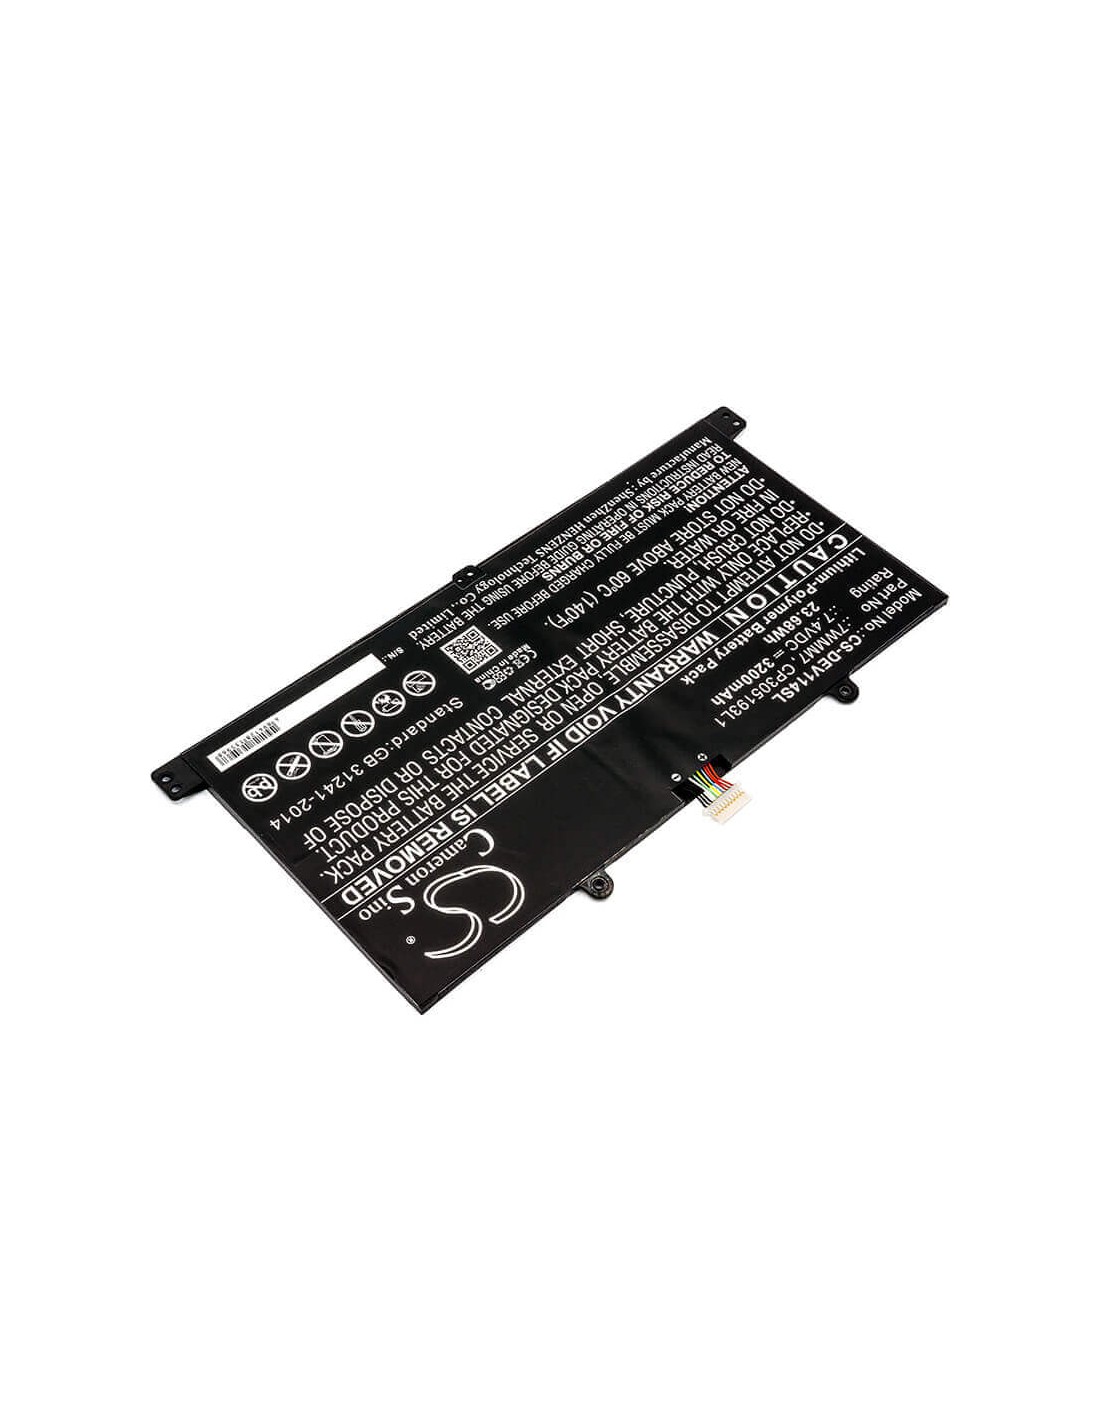 Battery for Dell Venue 11 Pro Keyboard Dock, D1r74, Cfc6c 7.4V, 3200mAh - 23.68Wh